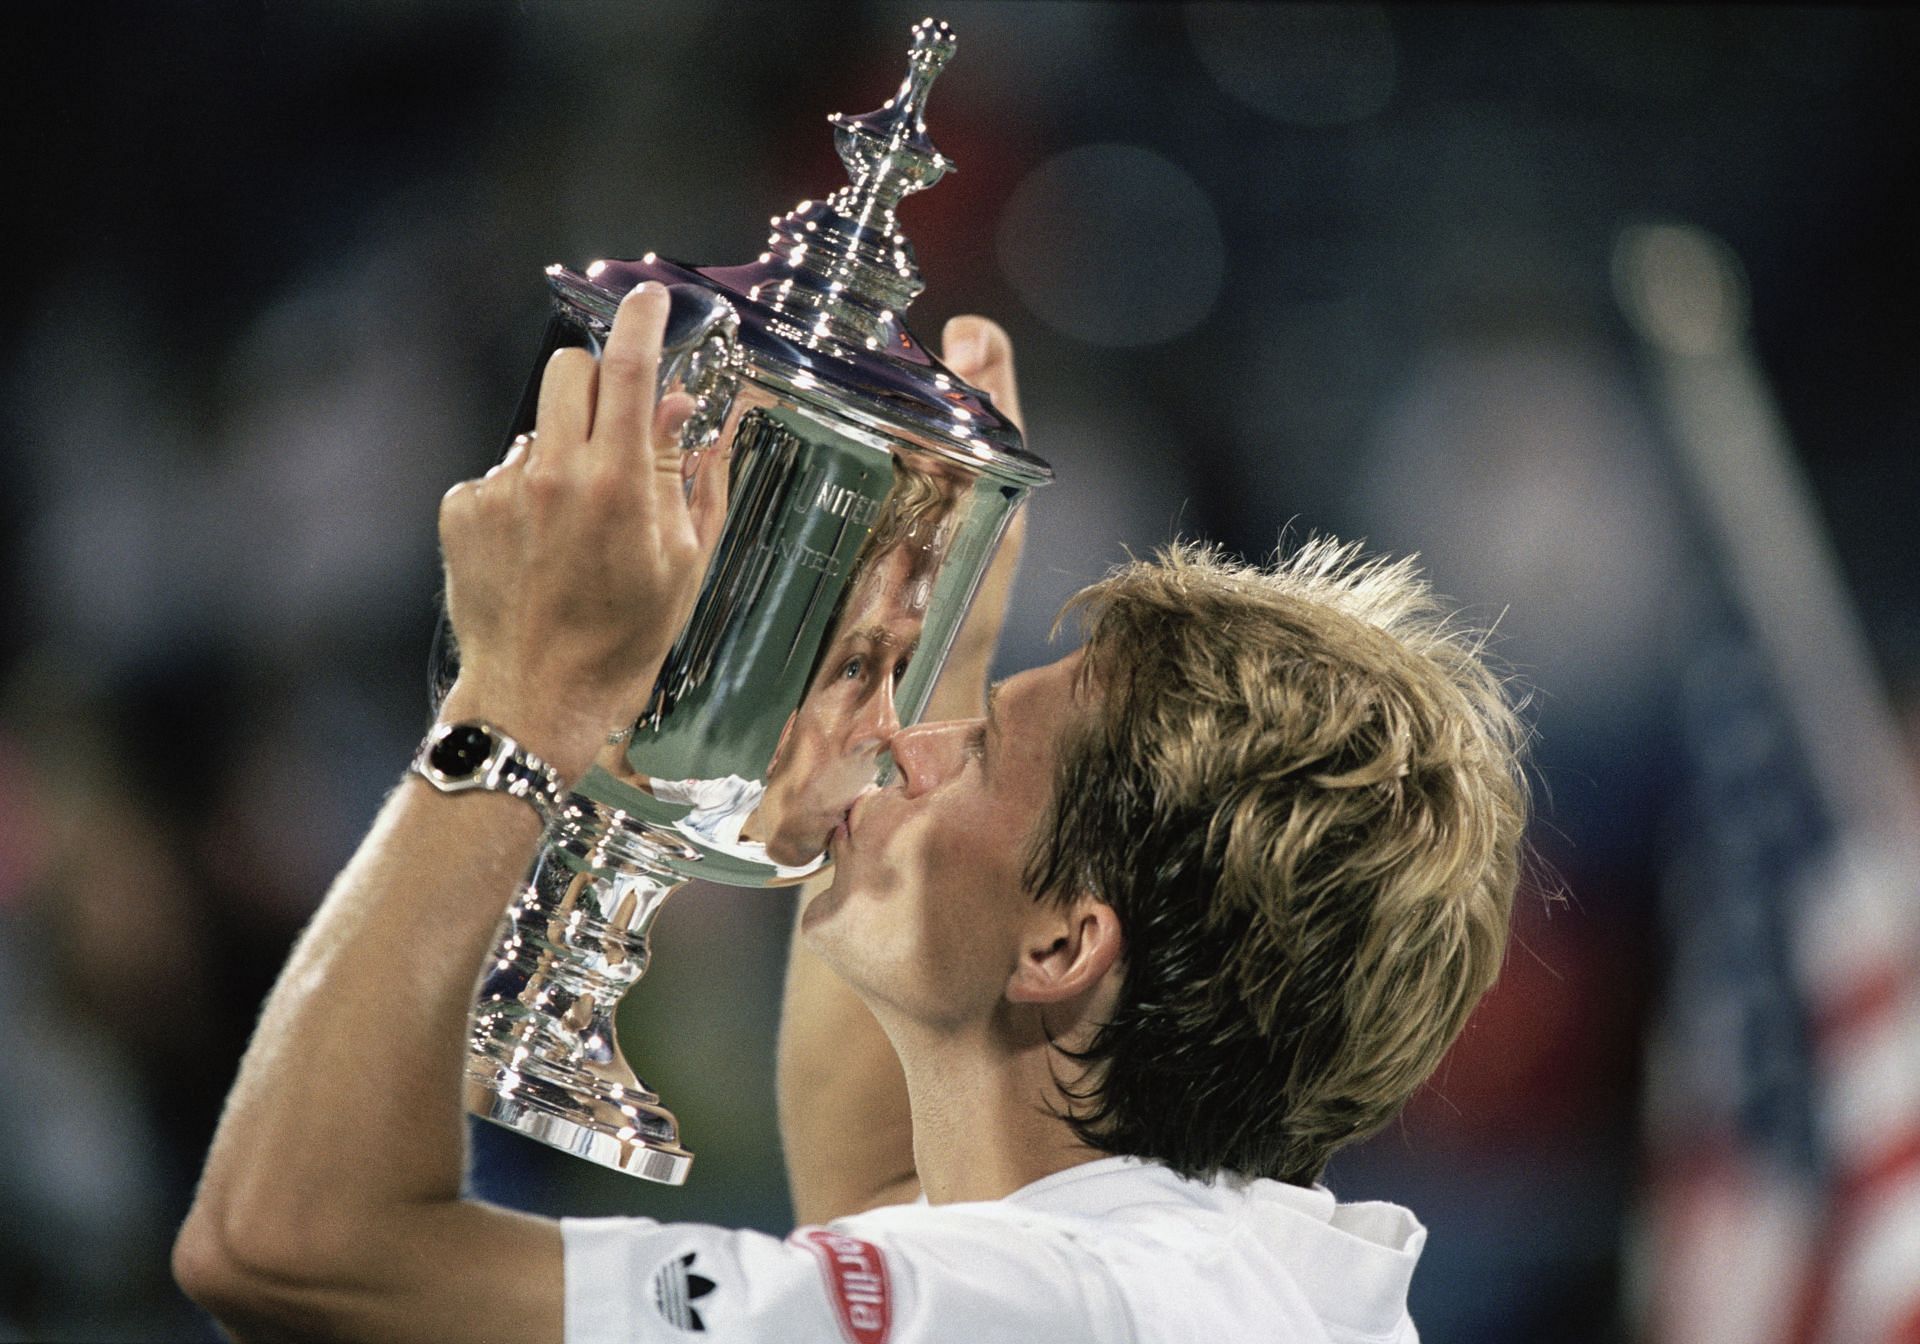 Stefan Edberg won his second title at the New York Major in 1992.